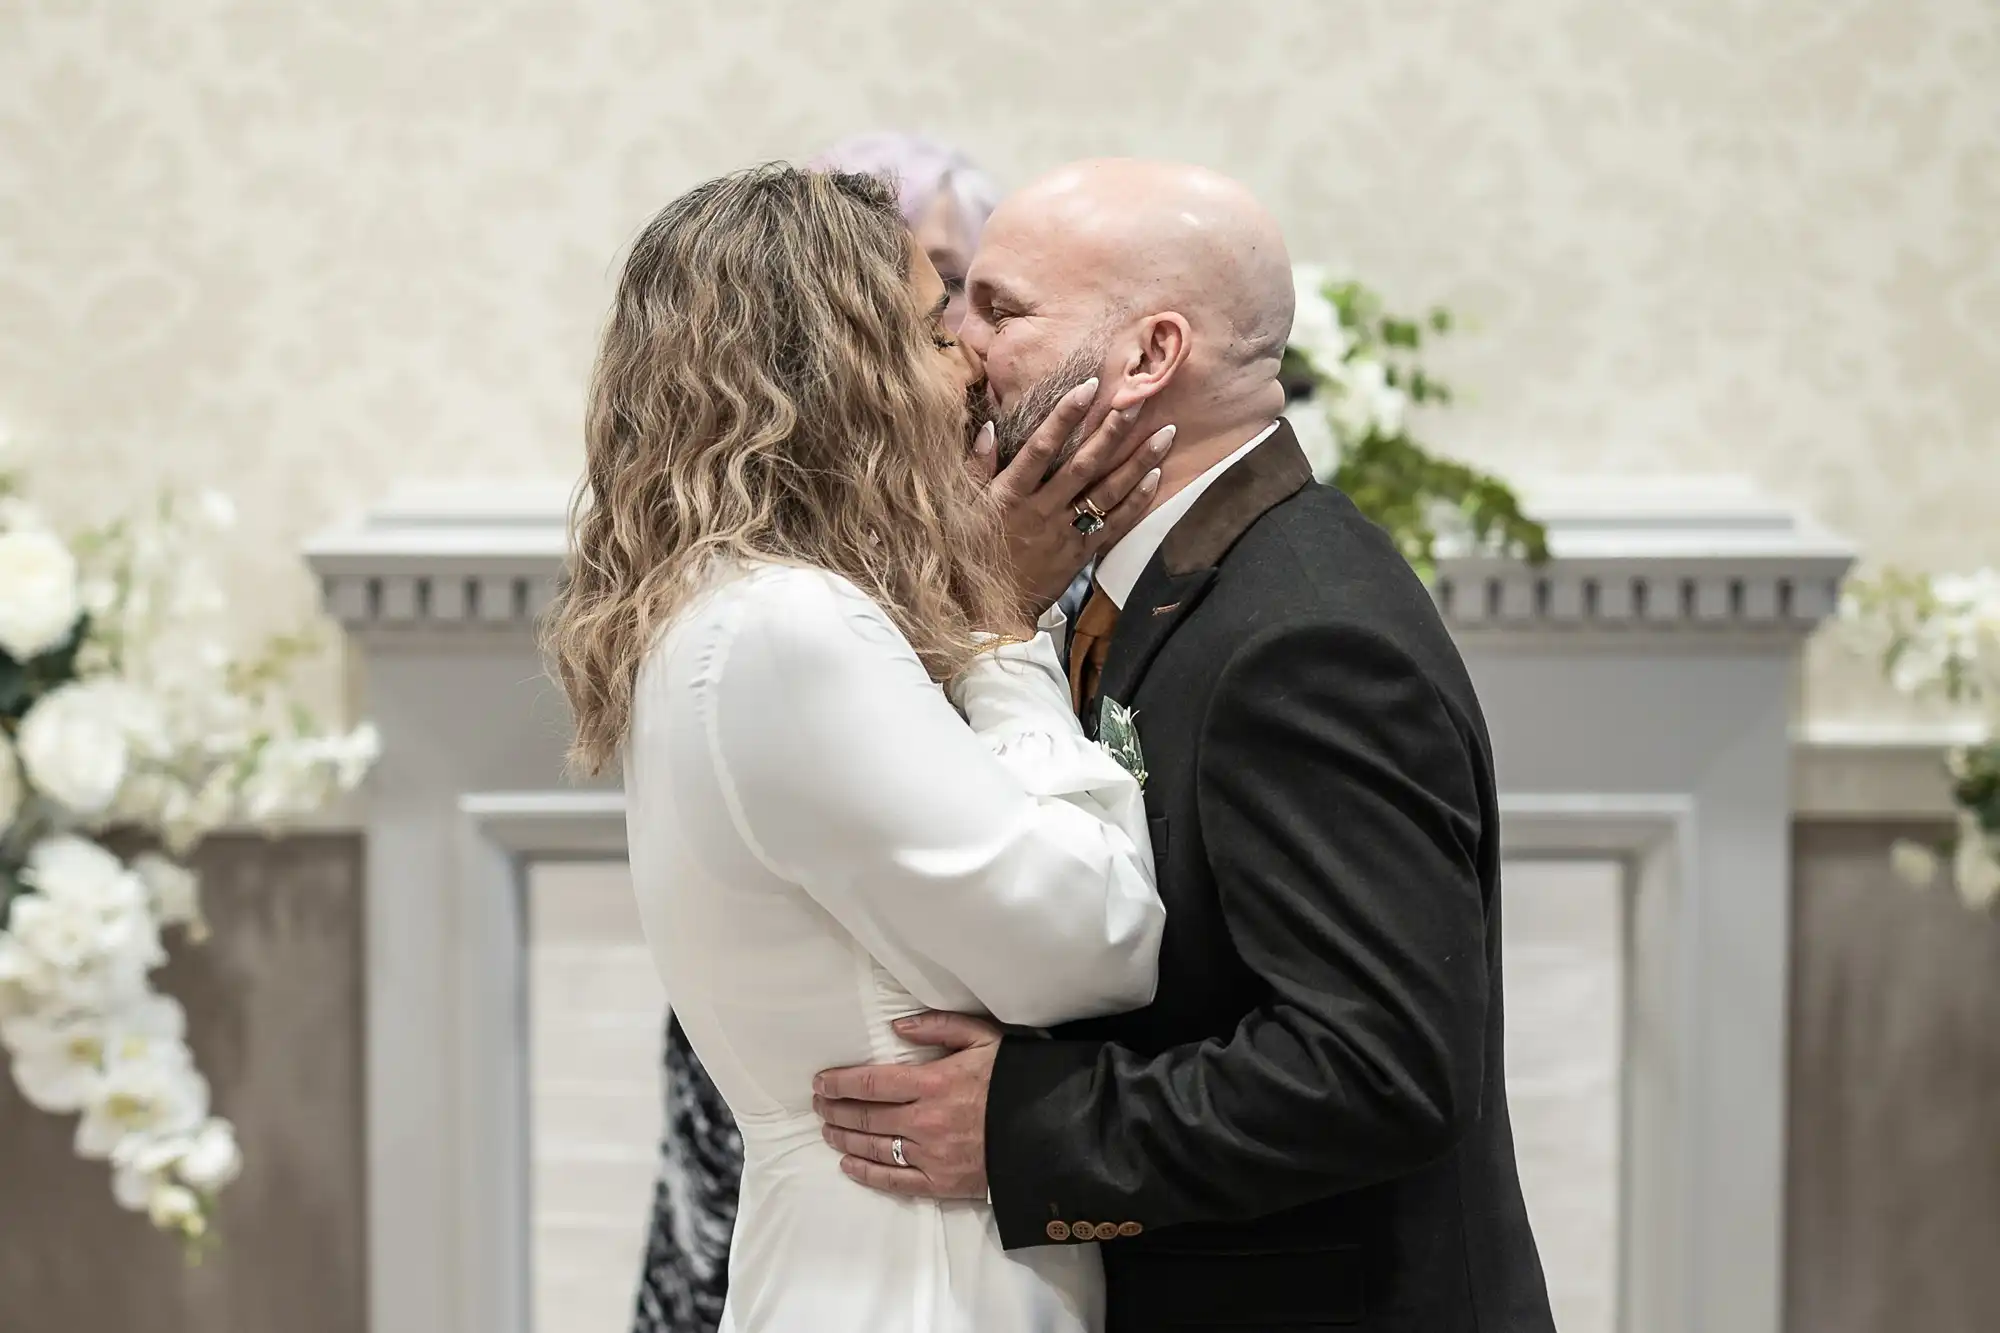 A couple dressed in formal attire kisses during their wedding ceremony, standing in front of a decorated altar with white flowers.